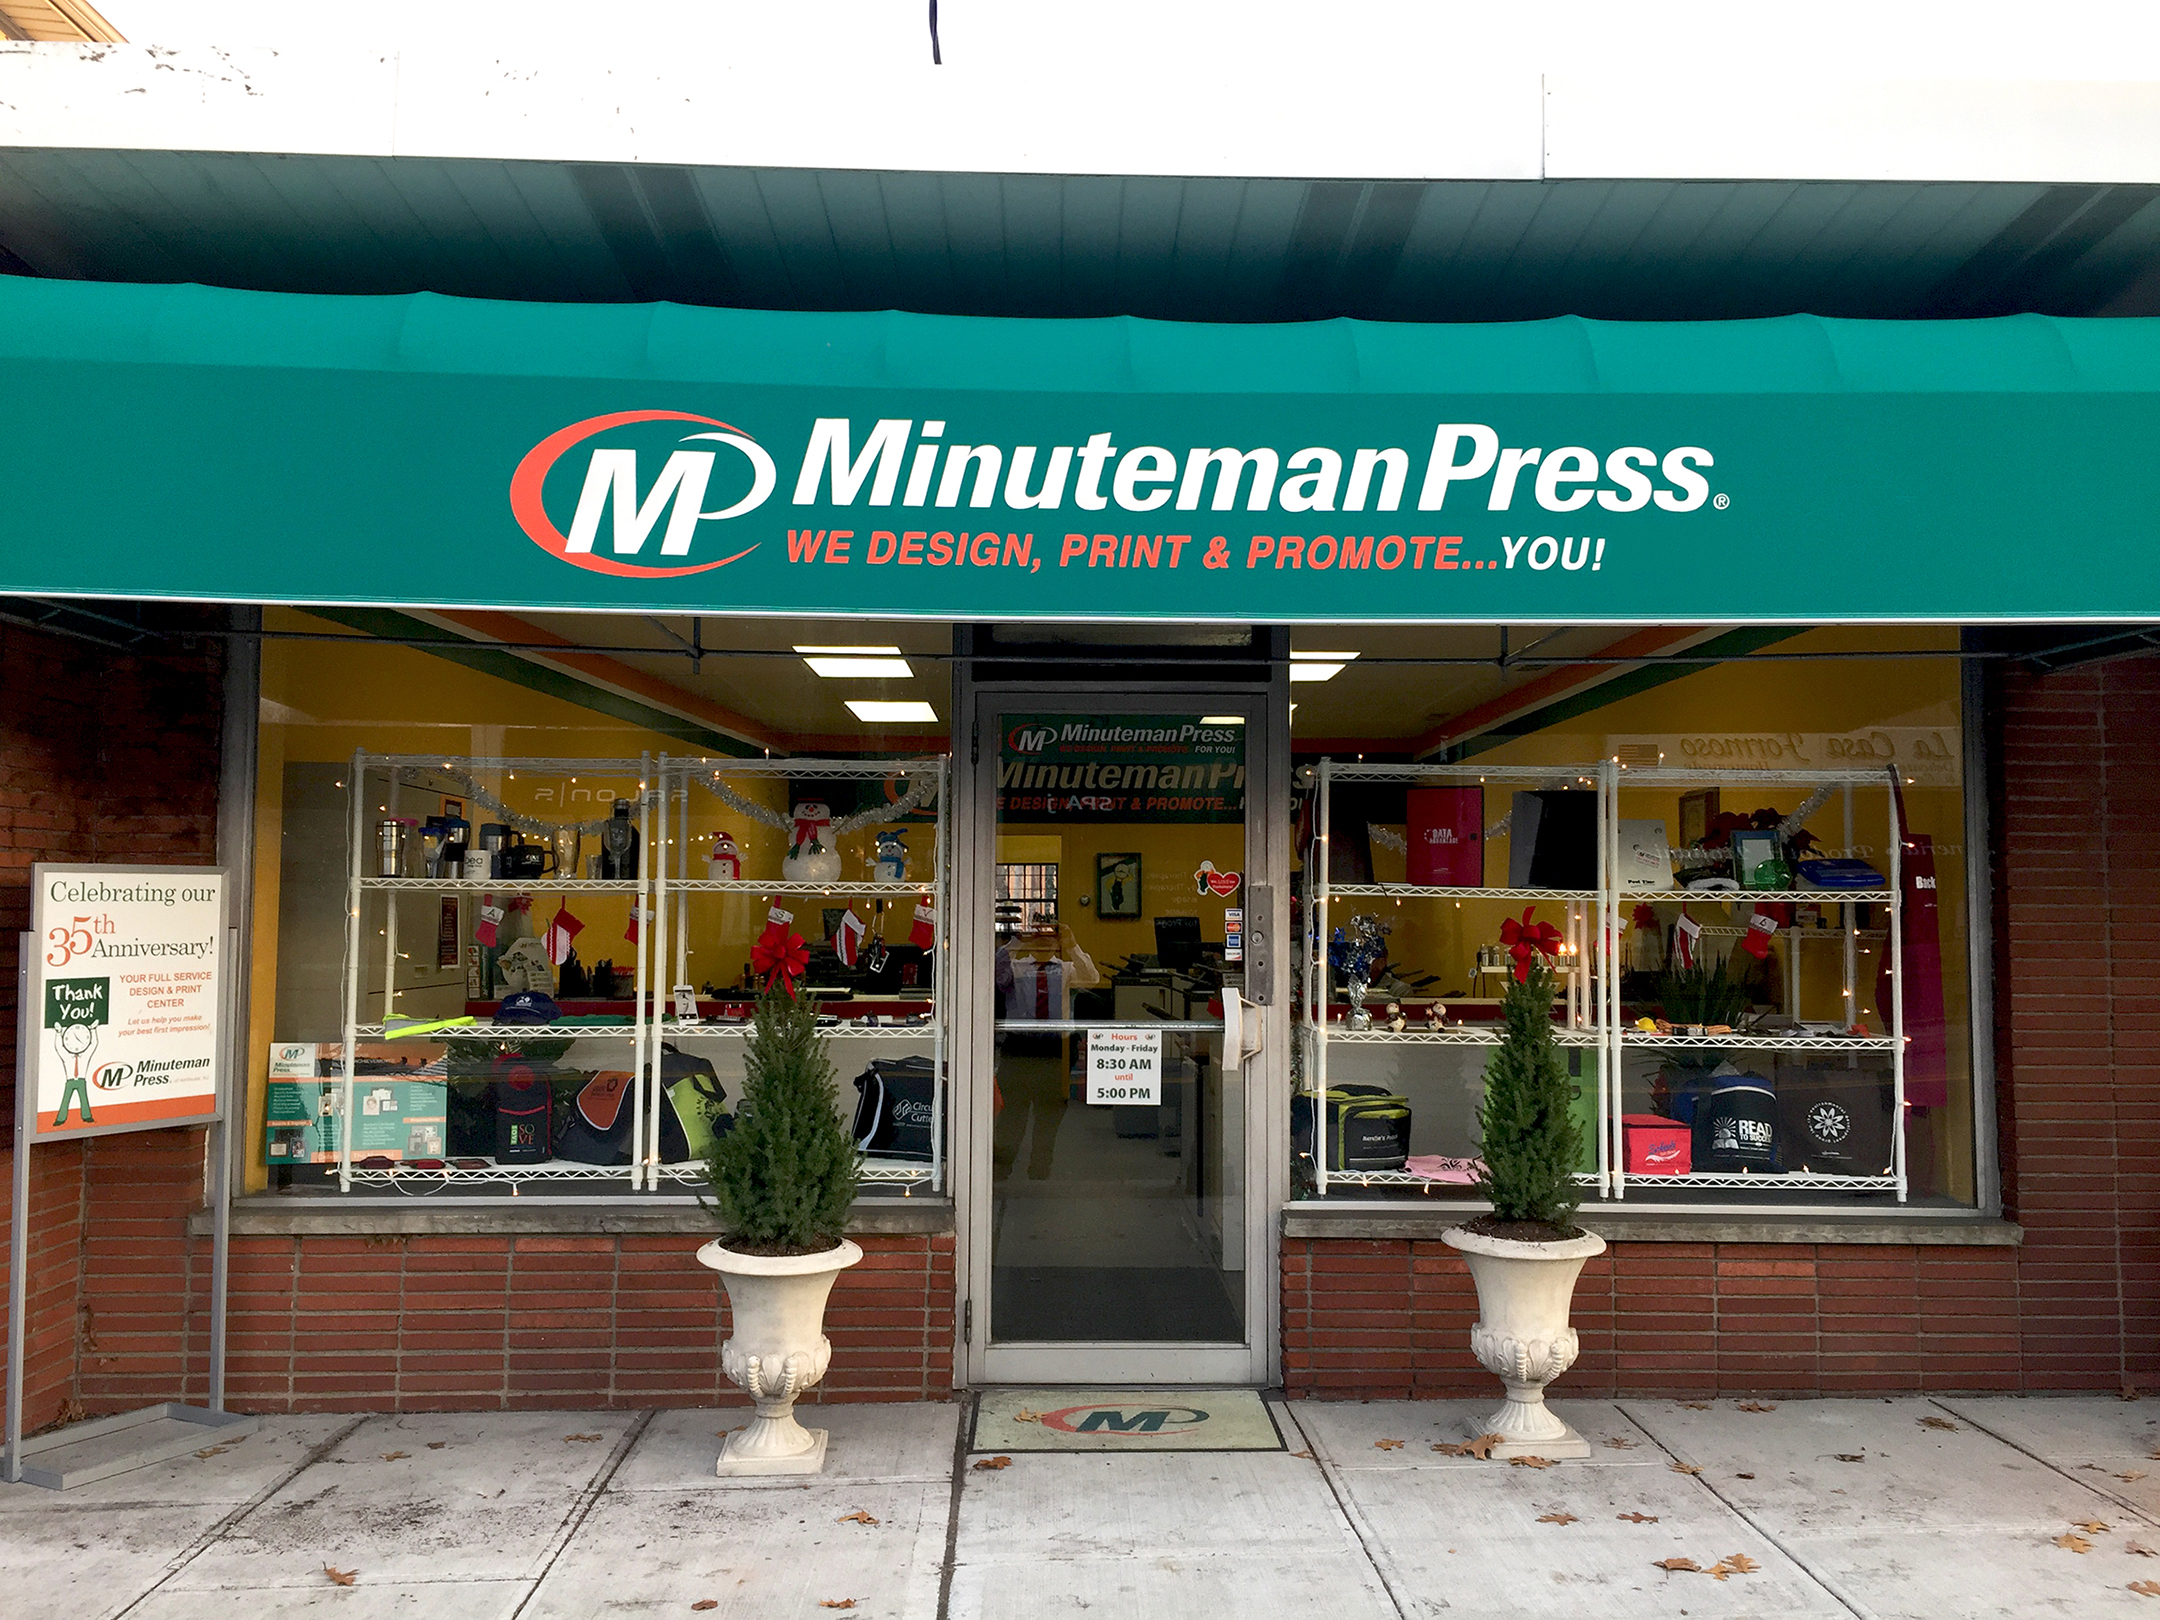 Minuteman Press franchise in Northvale, NJ moved to its brand new retail location at 202 Livingston Street, right in the heart of Northvale